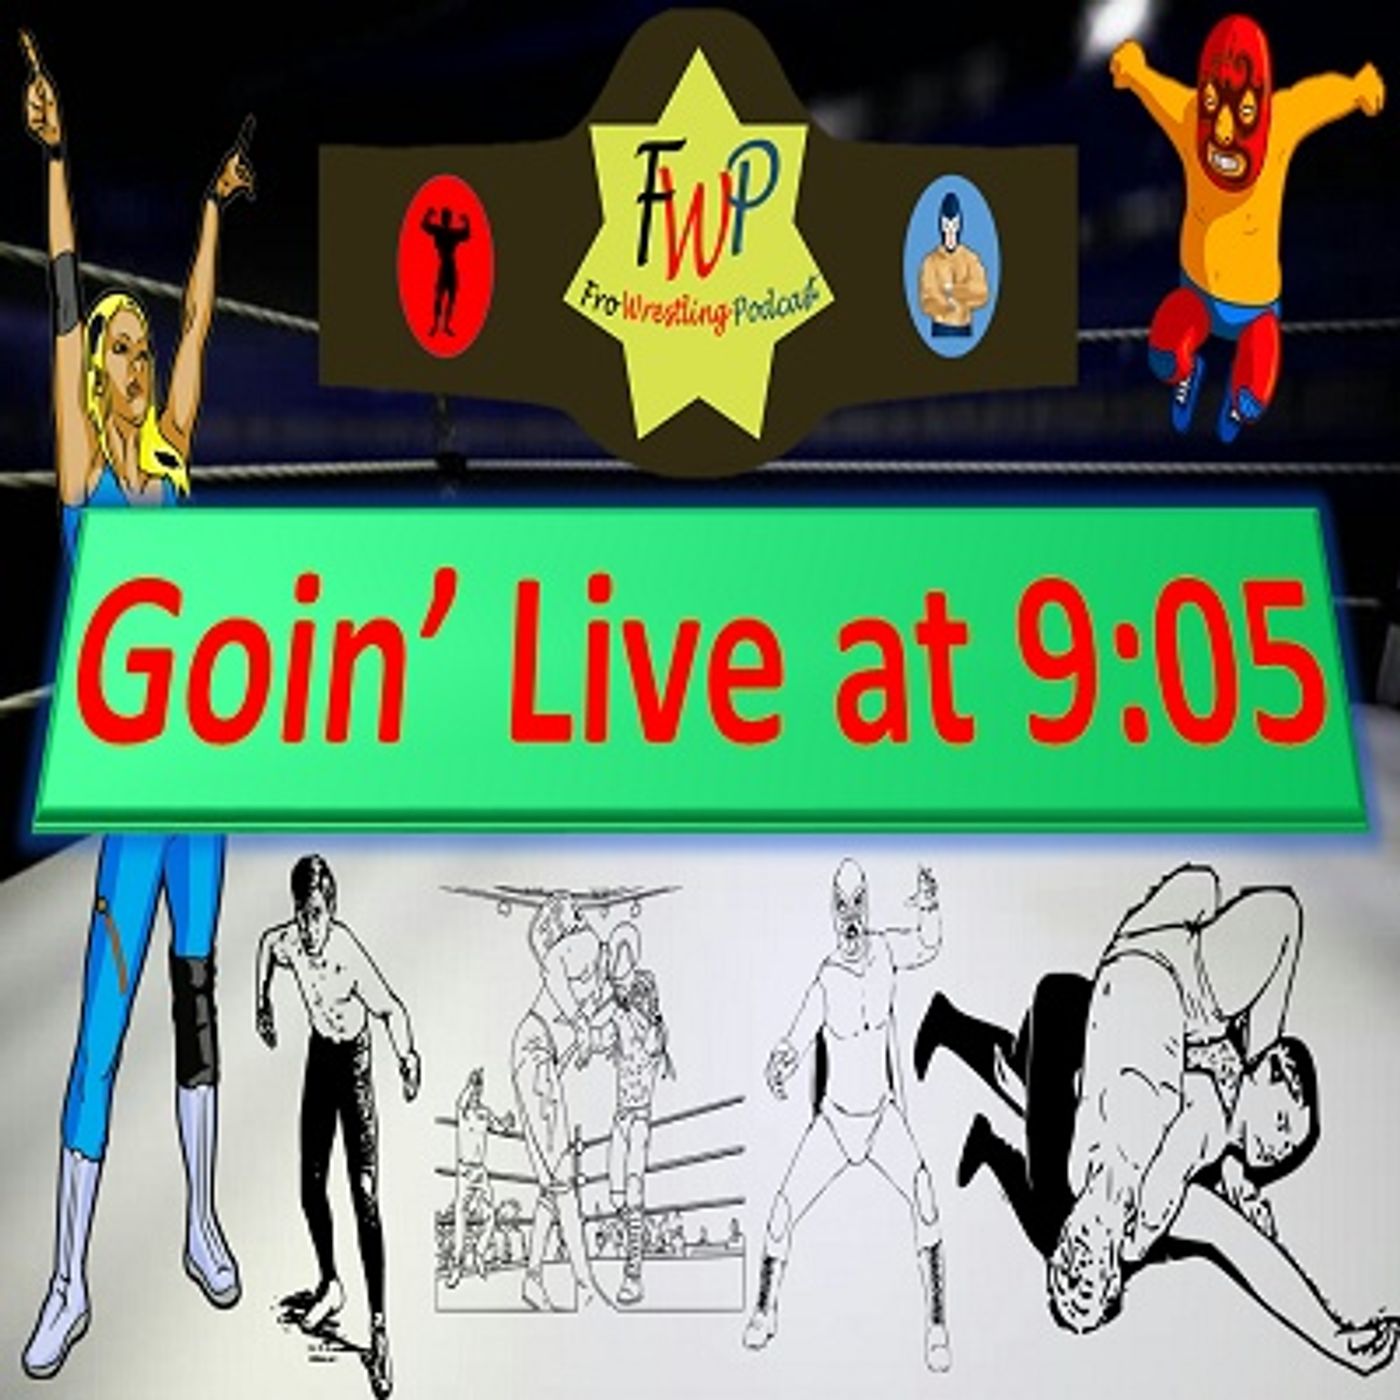 Fro Wrestling Podcast - Goin’ Live at 9:05